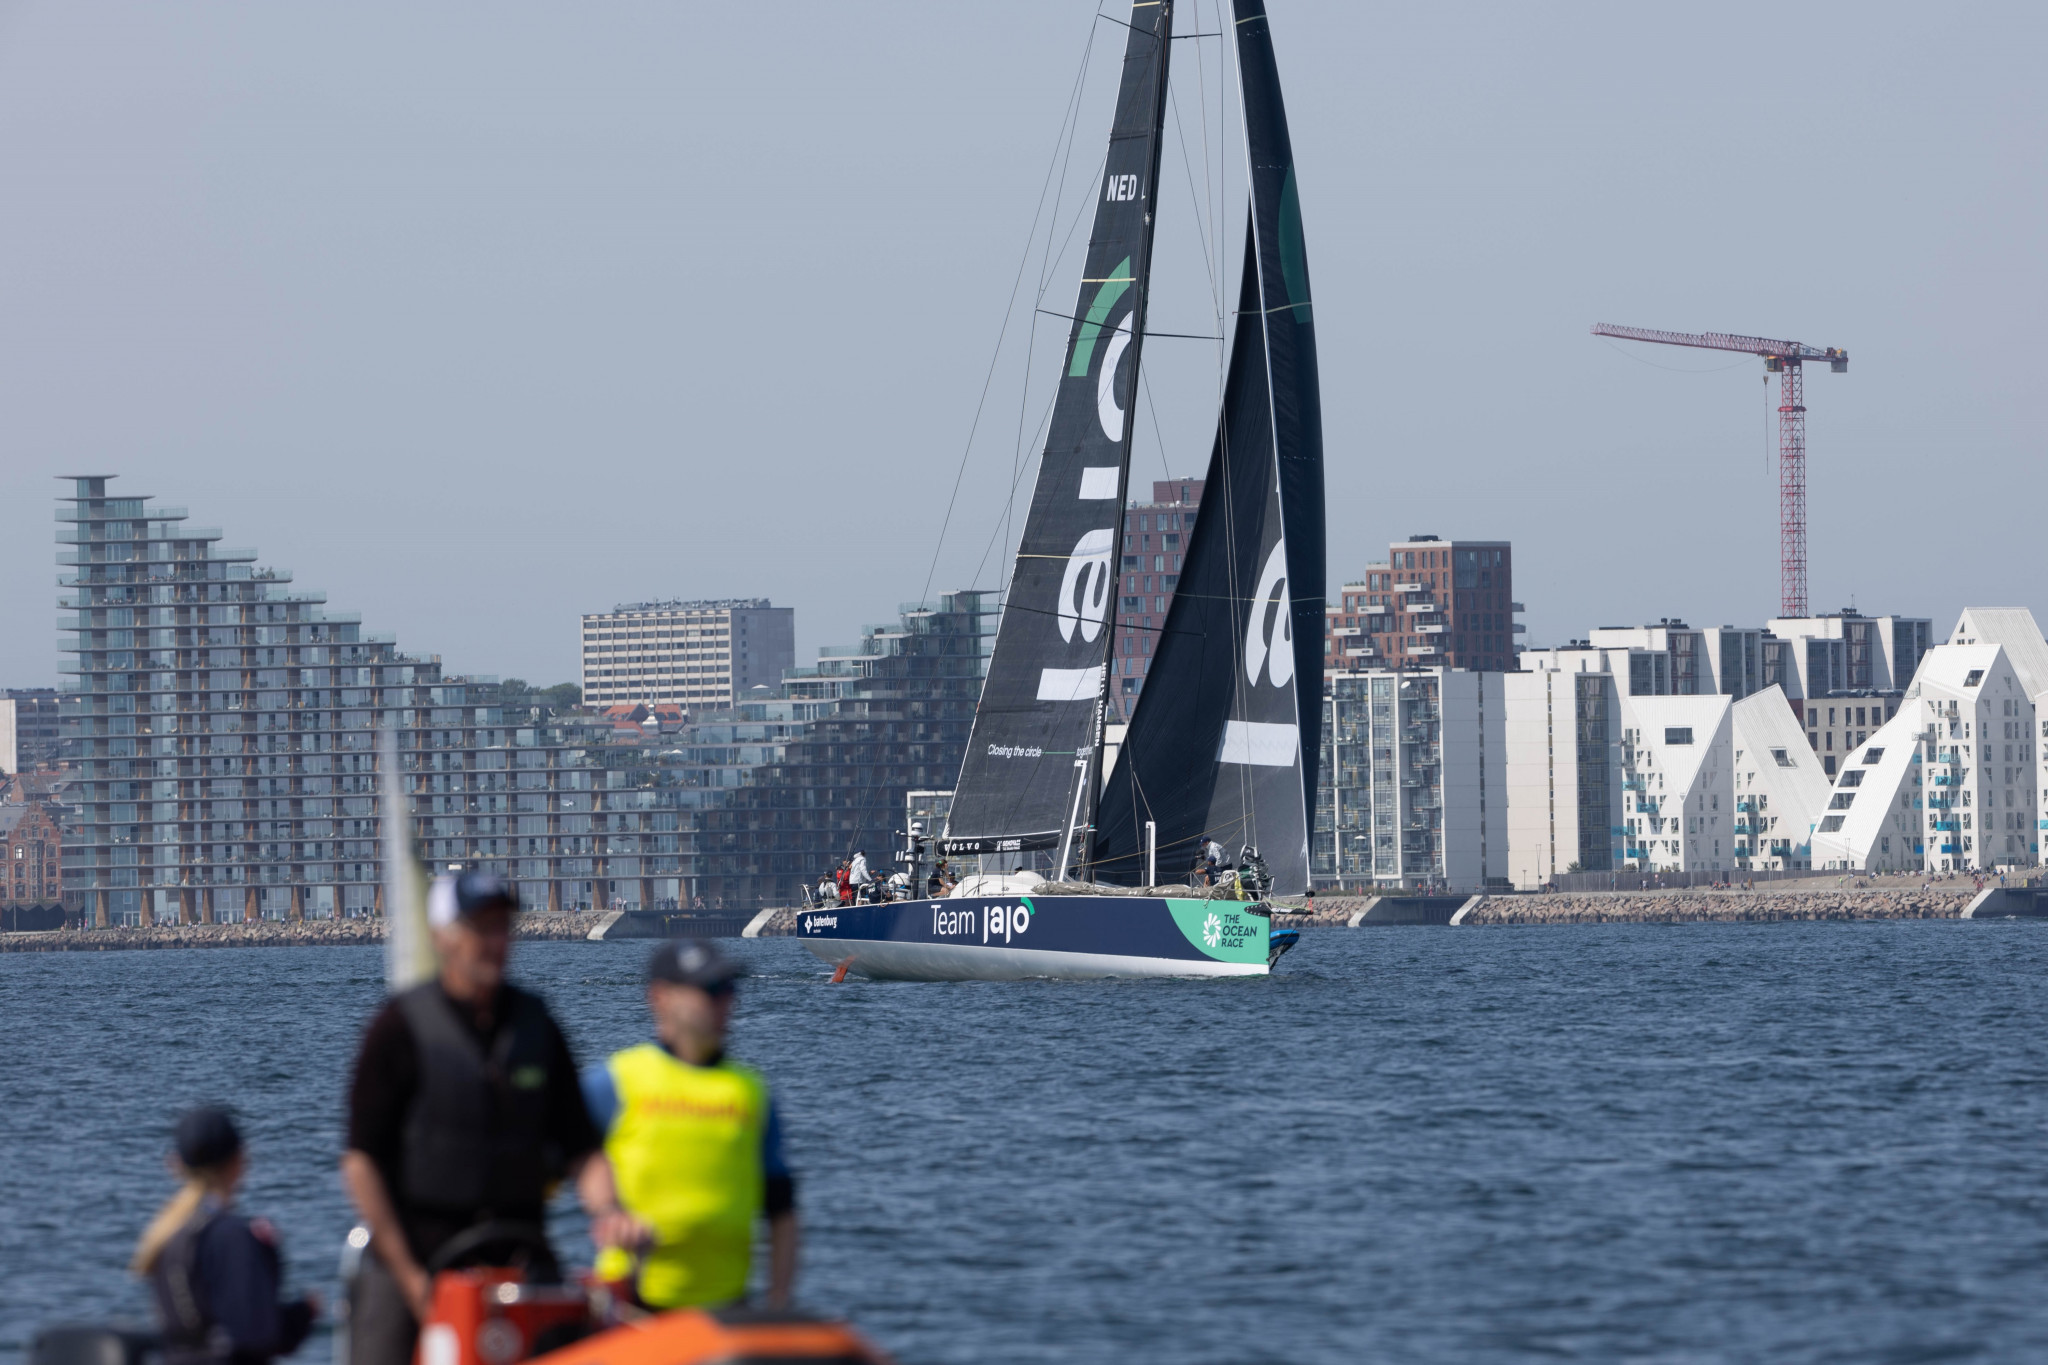 Team JAJO features Olympians in Nicholas Heiner and Martin Kirketerp as they competed in the VO65 in-port race in Aarhus ©Peter Broegger